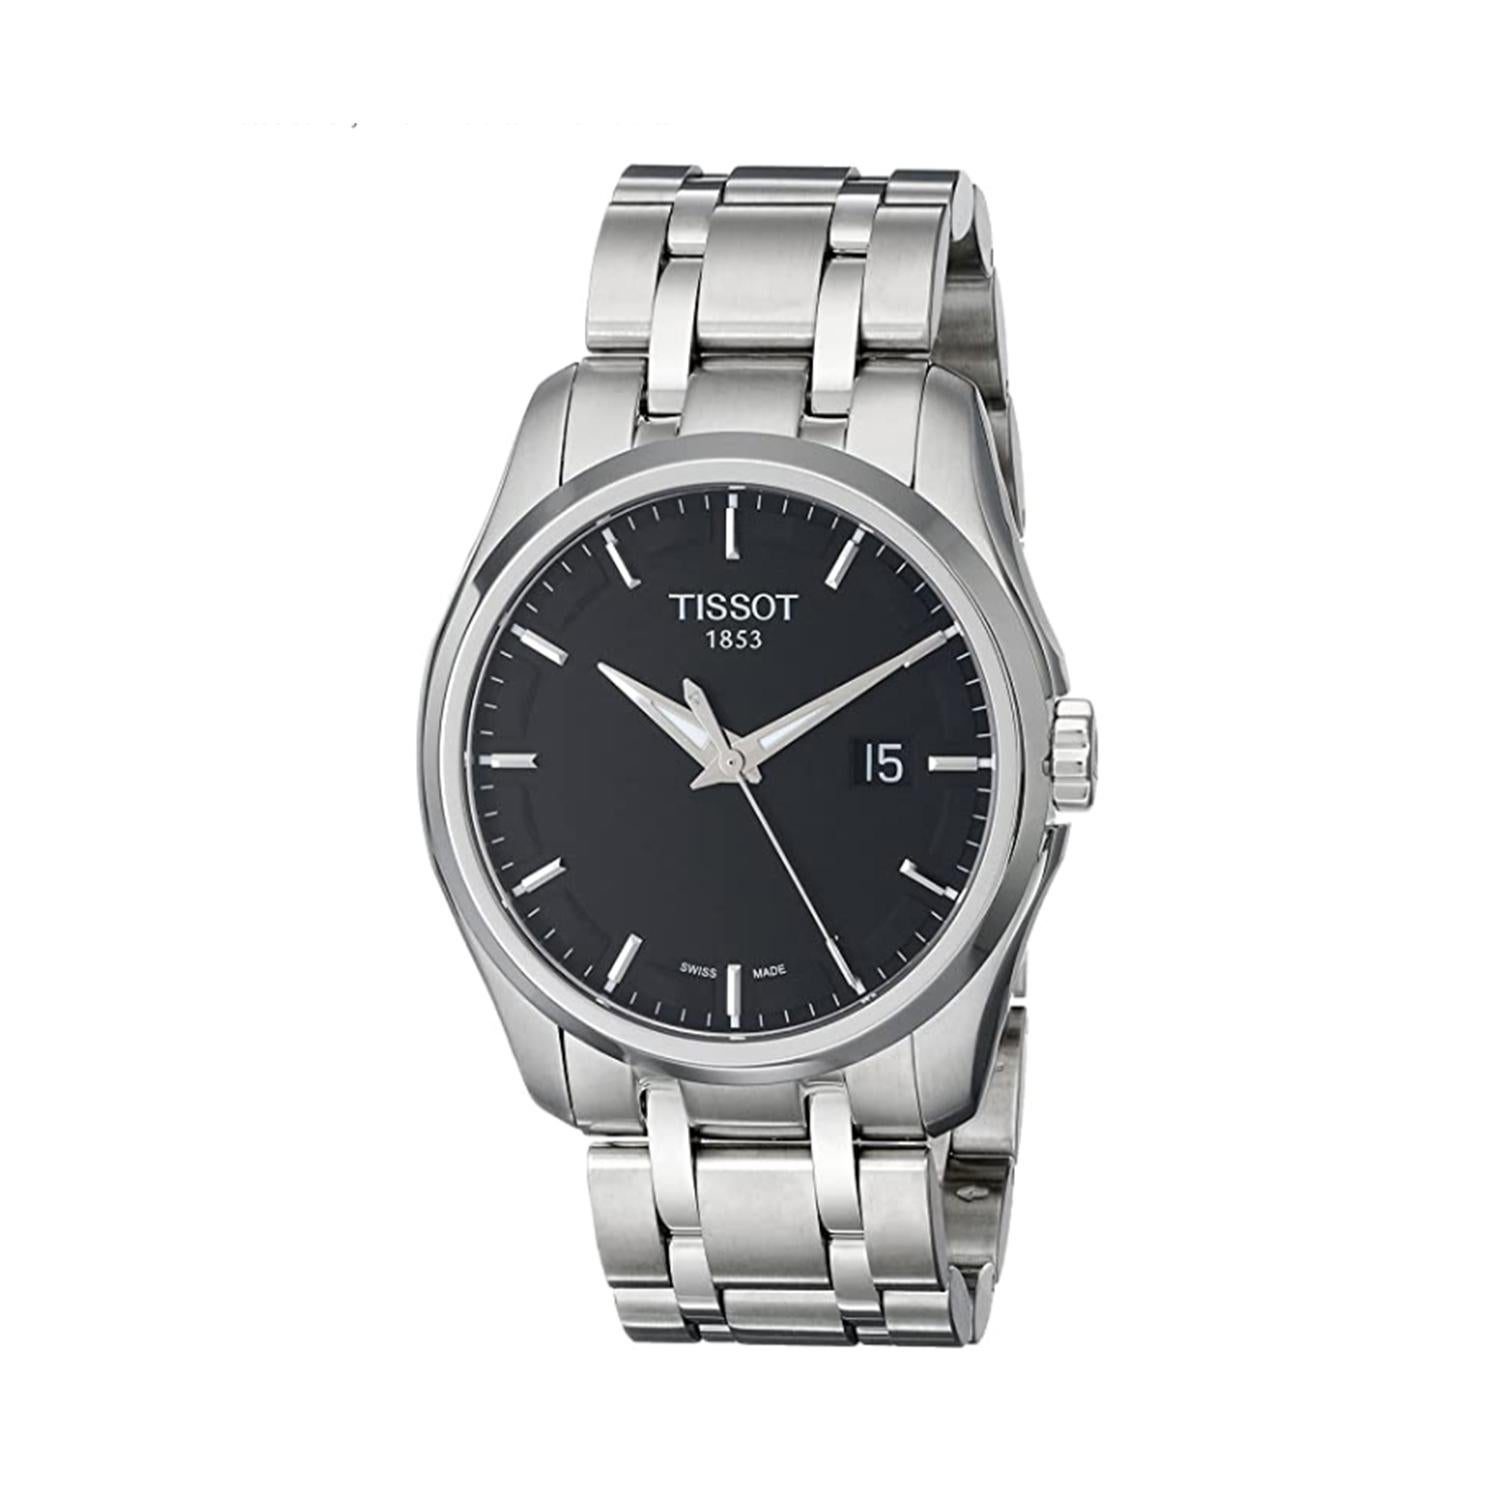 This display model Tissot Couturier  T035.410.11.051.00 is a beautiful men's timepiece that is powered by quartz (battery) movement which is cased in a stainless steel case. It has a round shape face,  dial, and has hand sticks style markers. It is